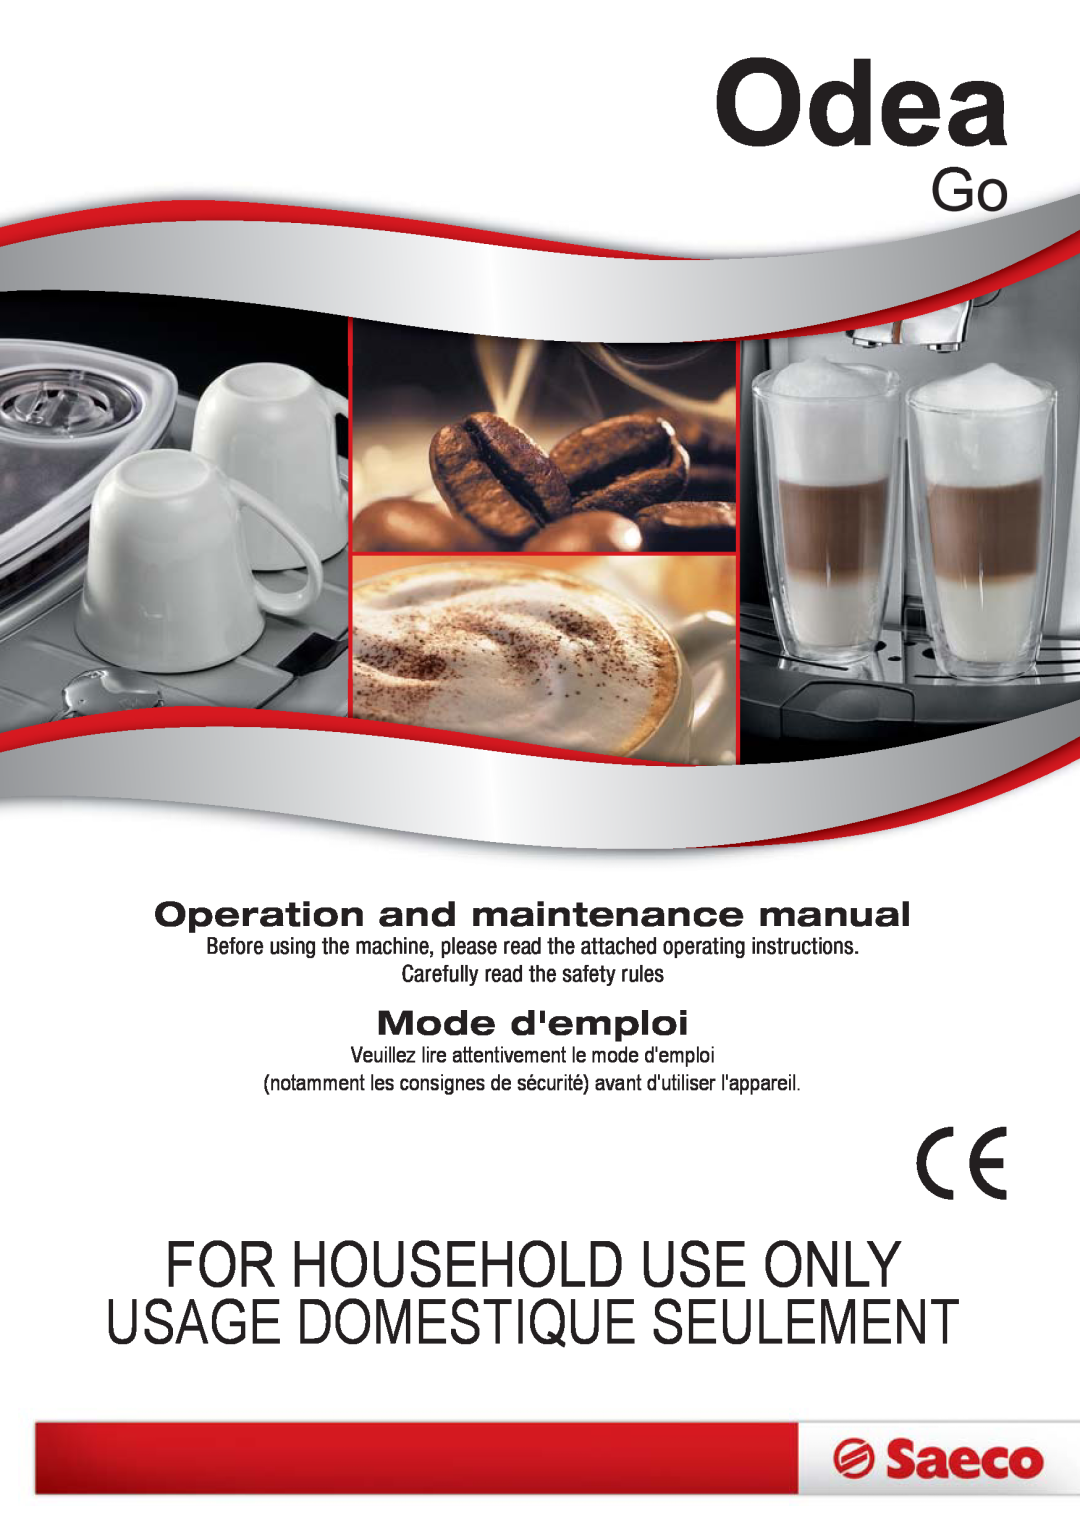 Saeco Coffee Makers SUP0310 manual For Household Use Only, Usage Domestique Seulement, Operation and maintenance manual 